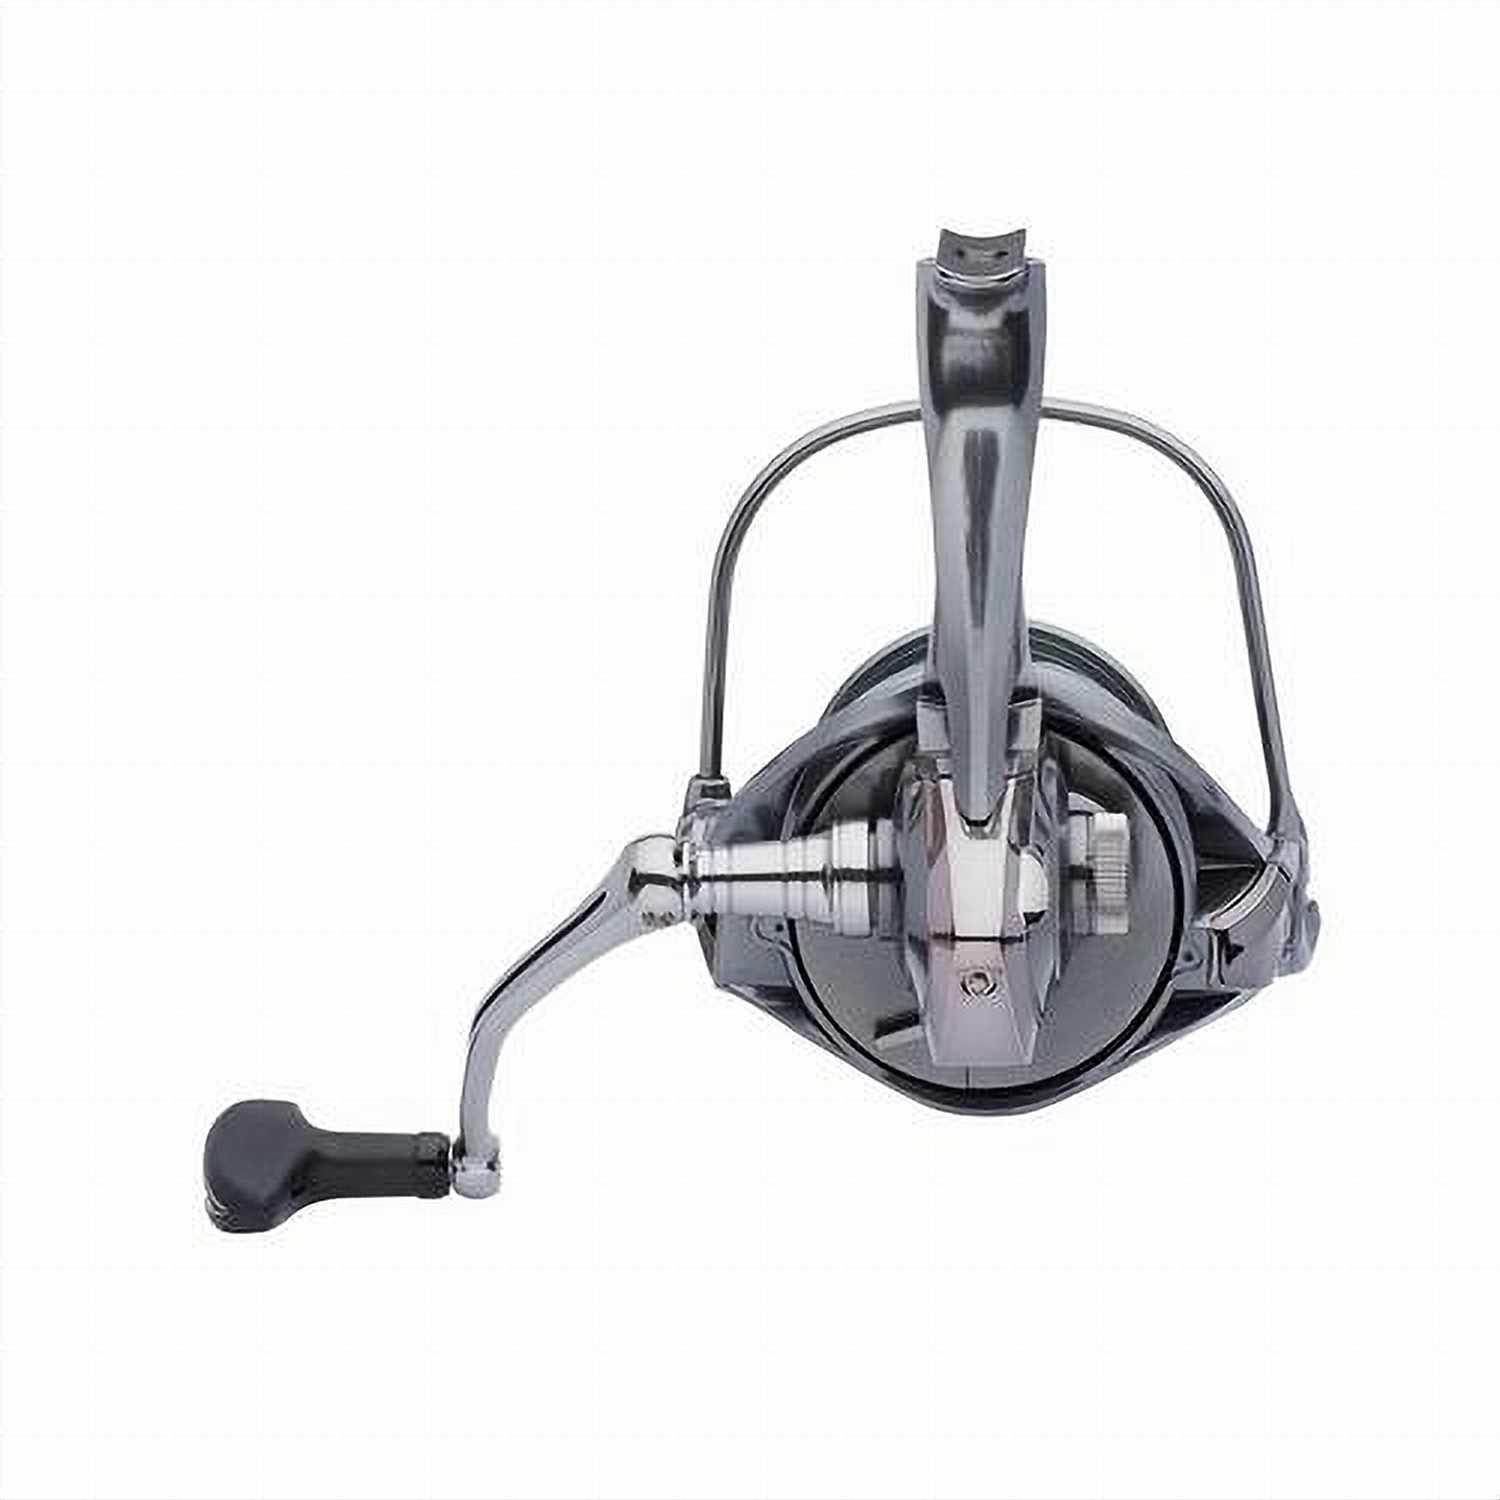 Penn New Affinity II 7000 LC Carbon Carp Fixed Spool Spinning Fishing Reel